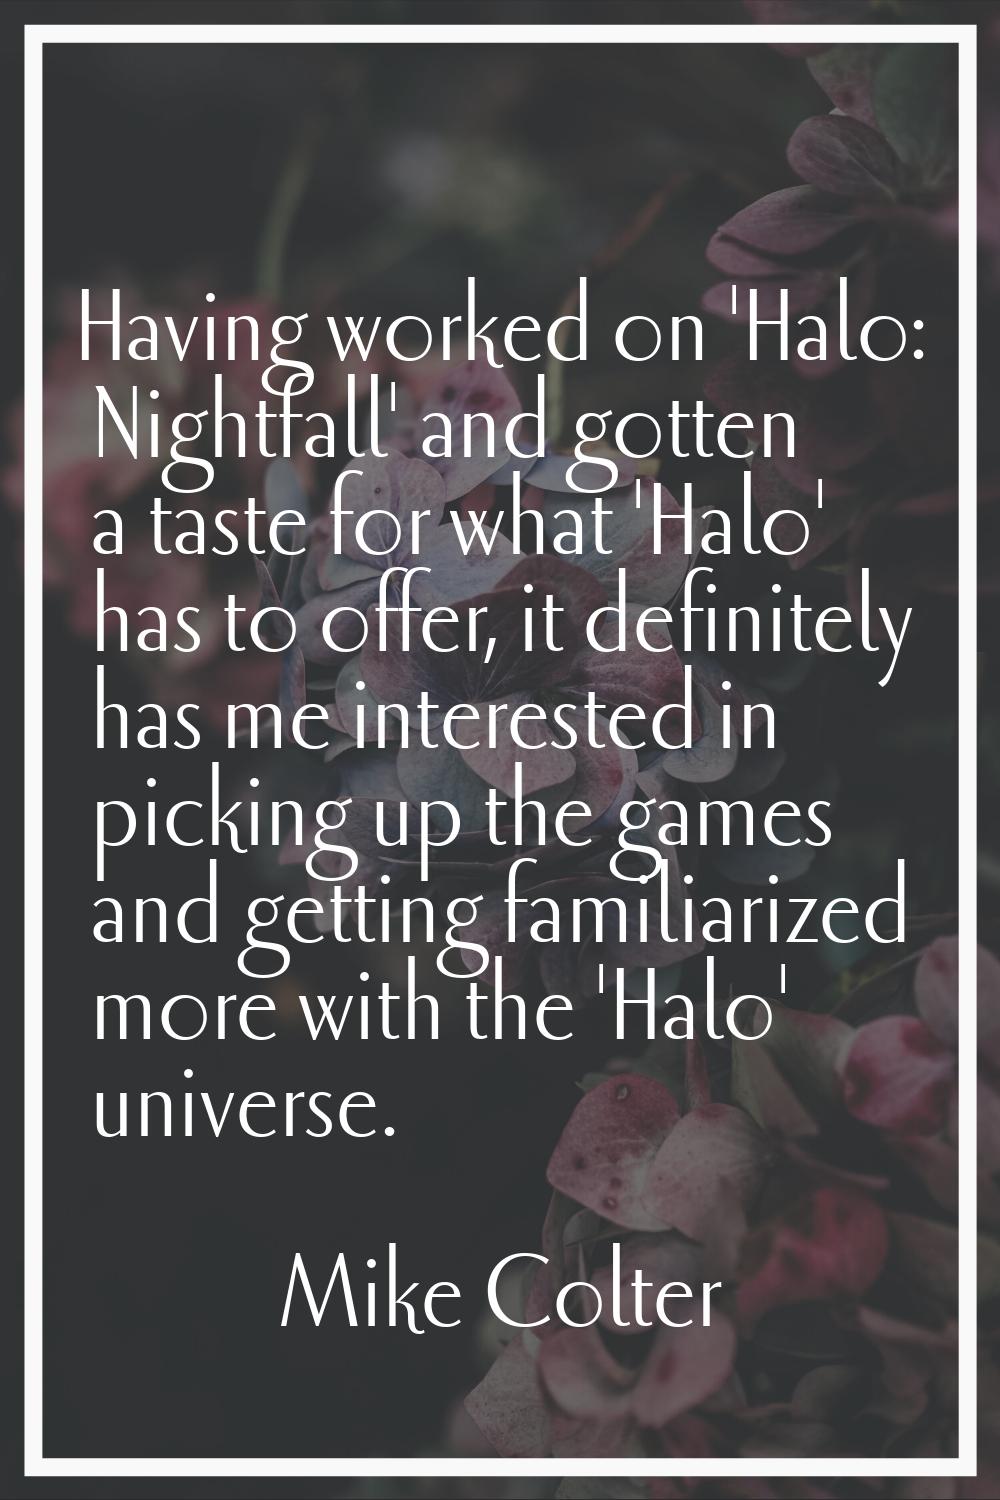 Having worked on 'Halo: Nightfall' and gotten a taste for what 'Halo' has to offer, it definitely h